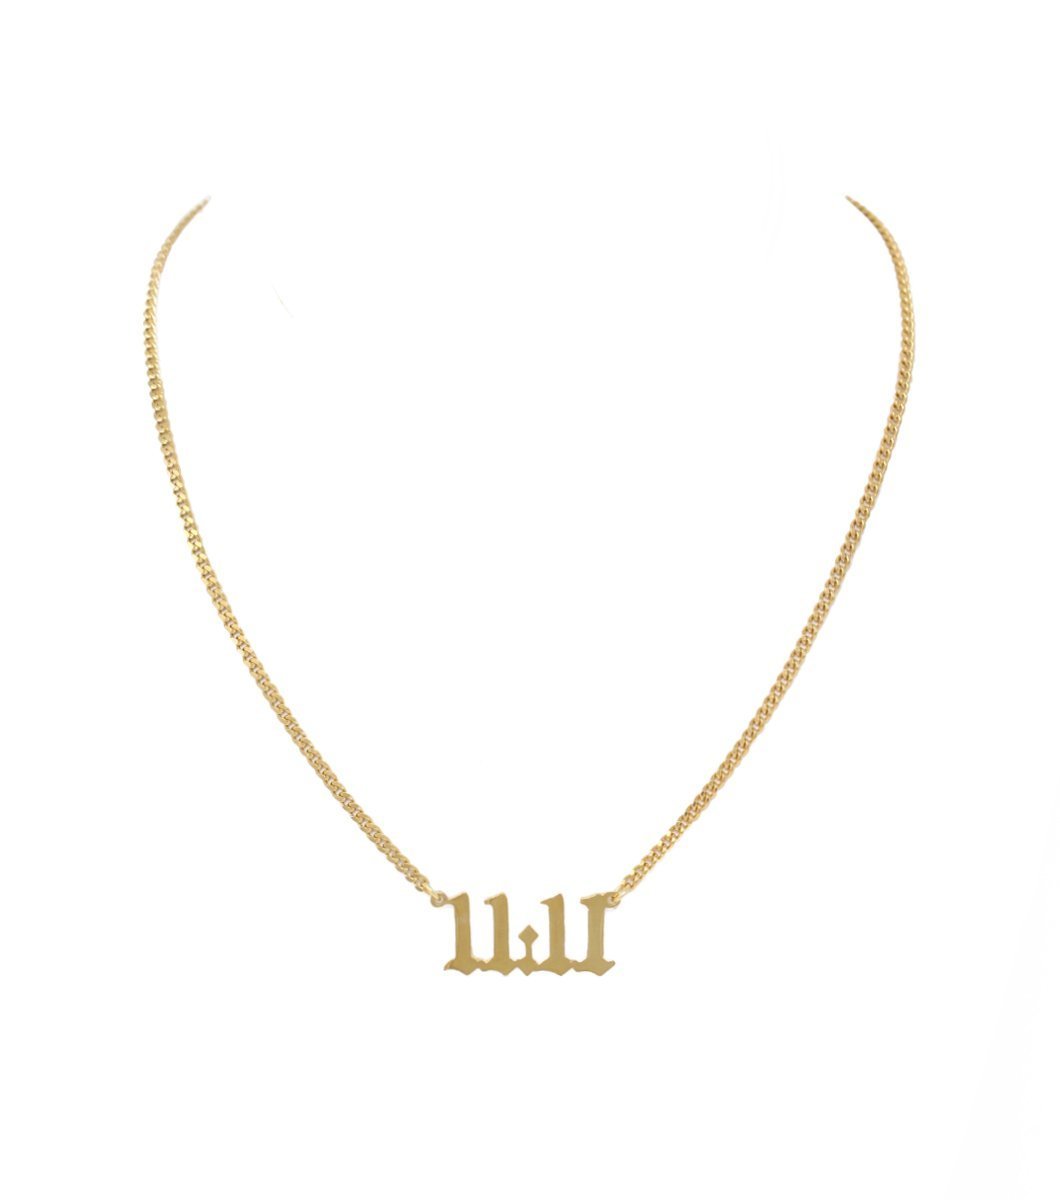 One Self Reminder 11:11 Necklace - LAURA CANTU JEWELRY US